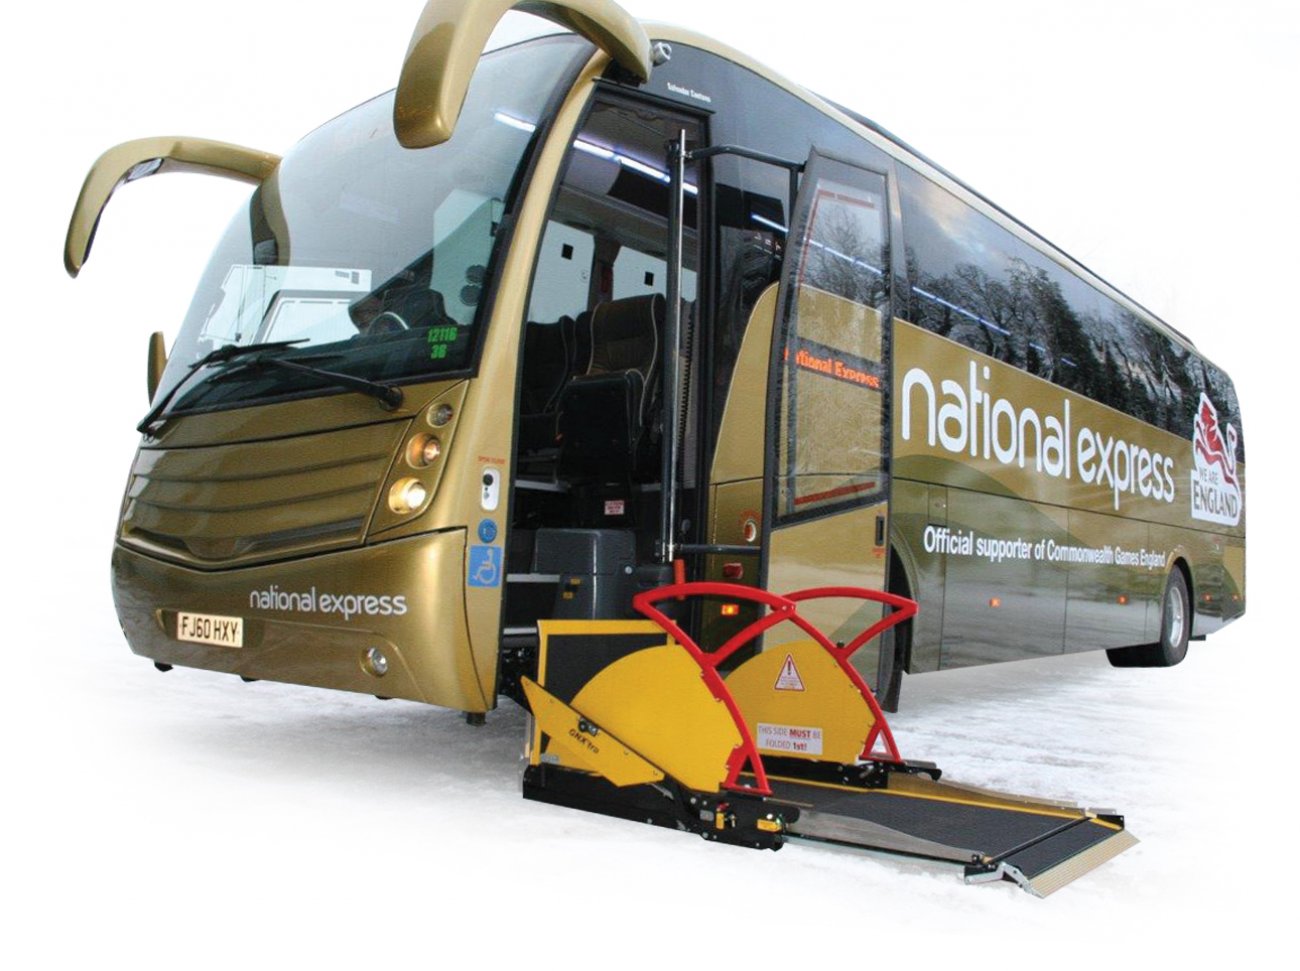 Mobility Networks to showcase complete PLS Access™ lift solutions at Eurobus Expo 2014